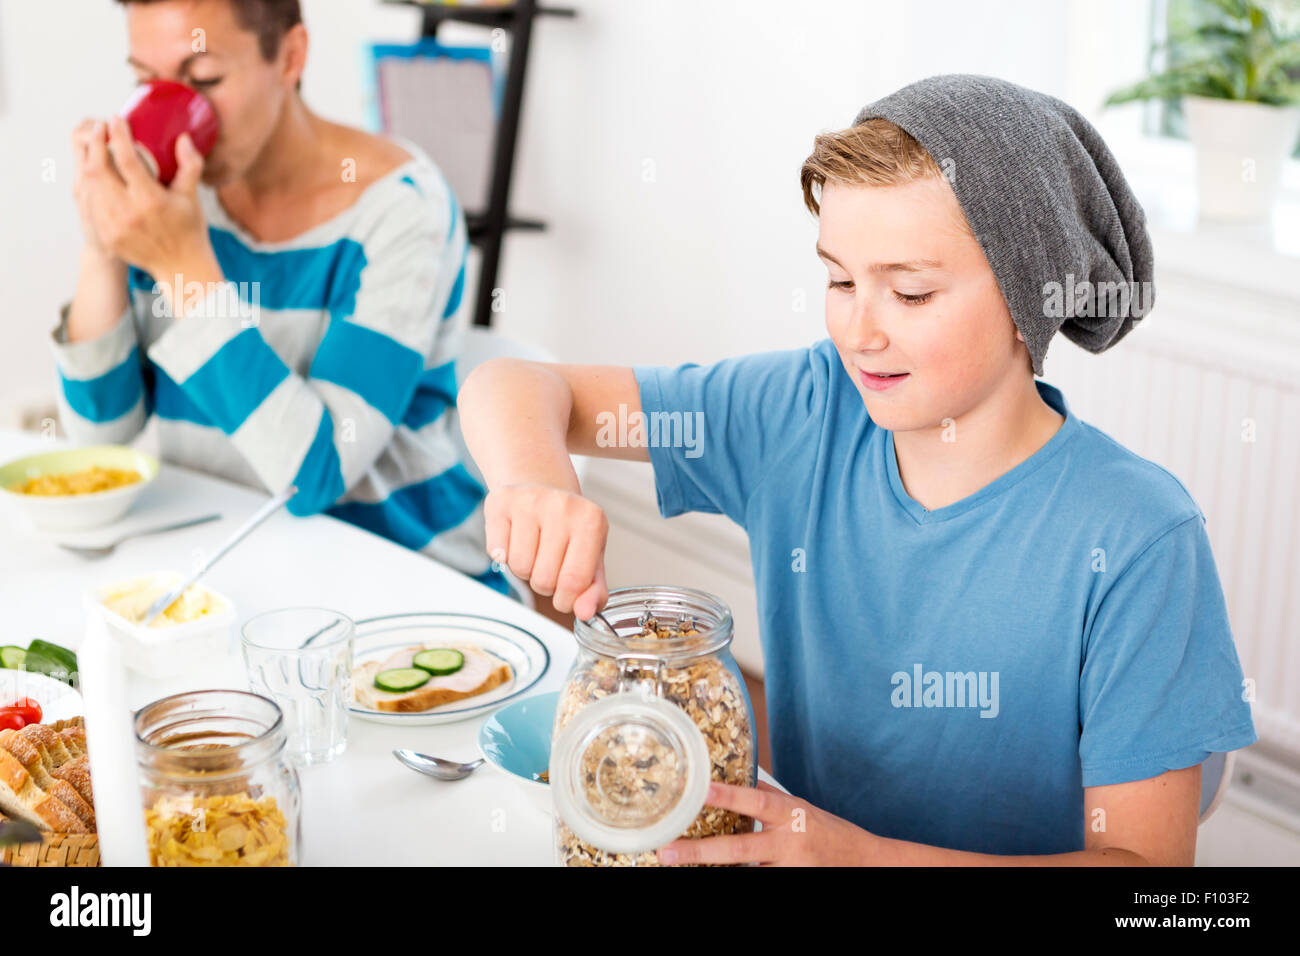 Mother and son having breakfast togehter in the morning. Son serving cereals out of a bottle at the breakfast table. Stock Photo